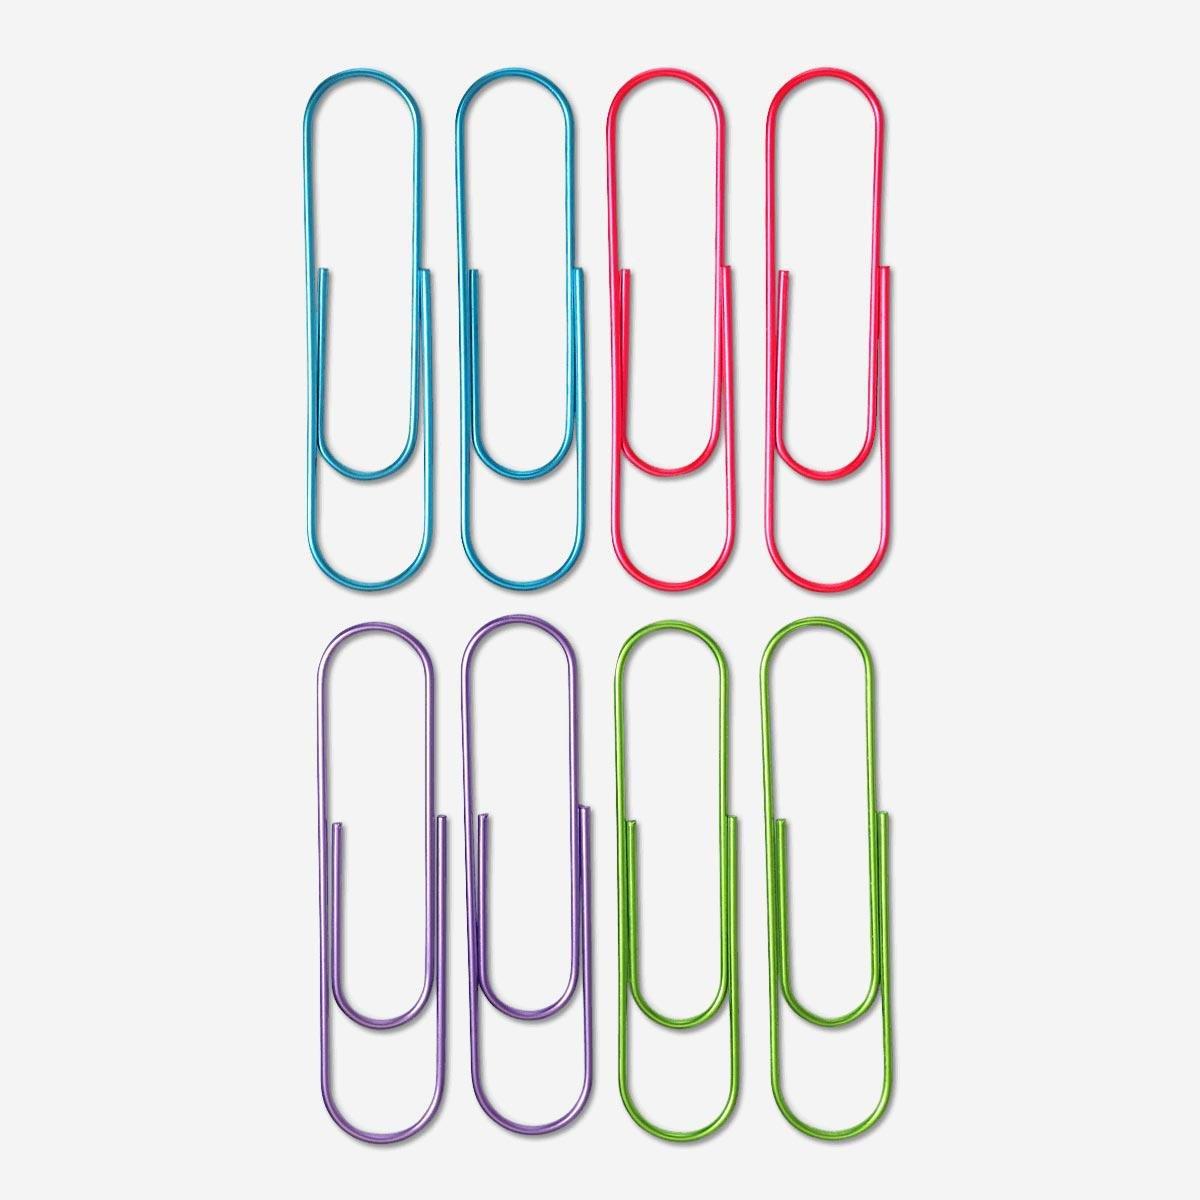 Giant metal paper clips